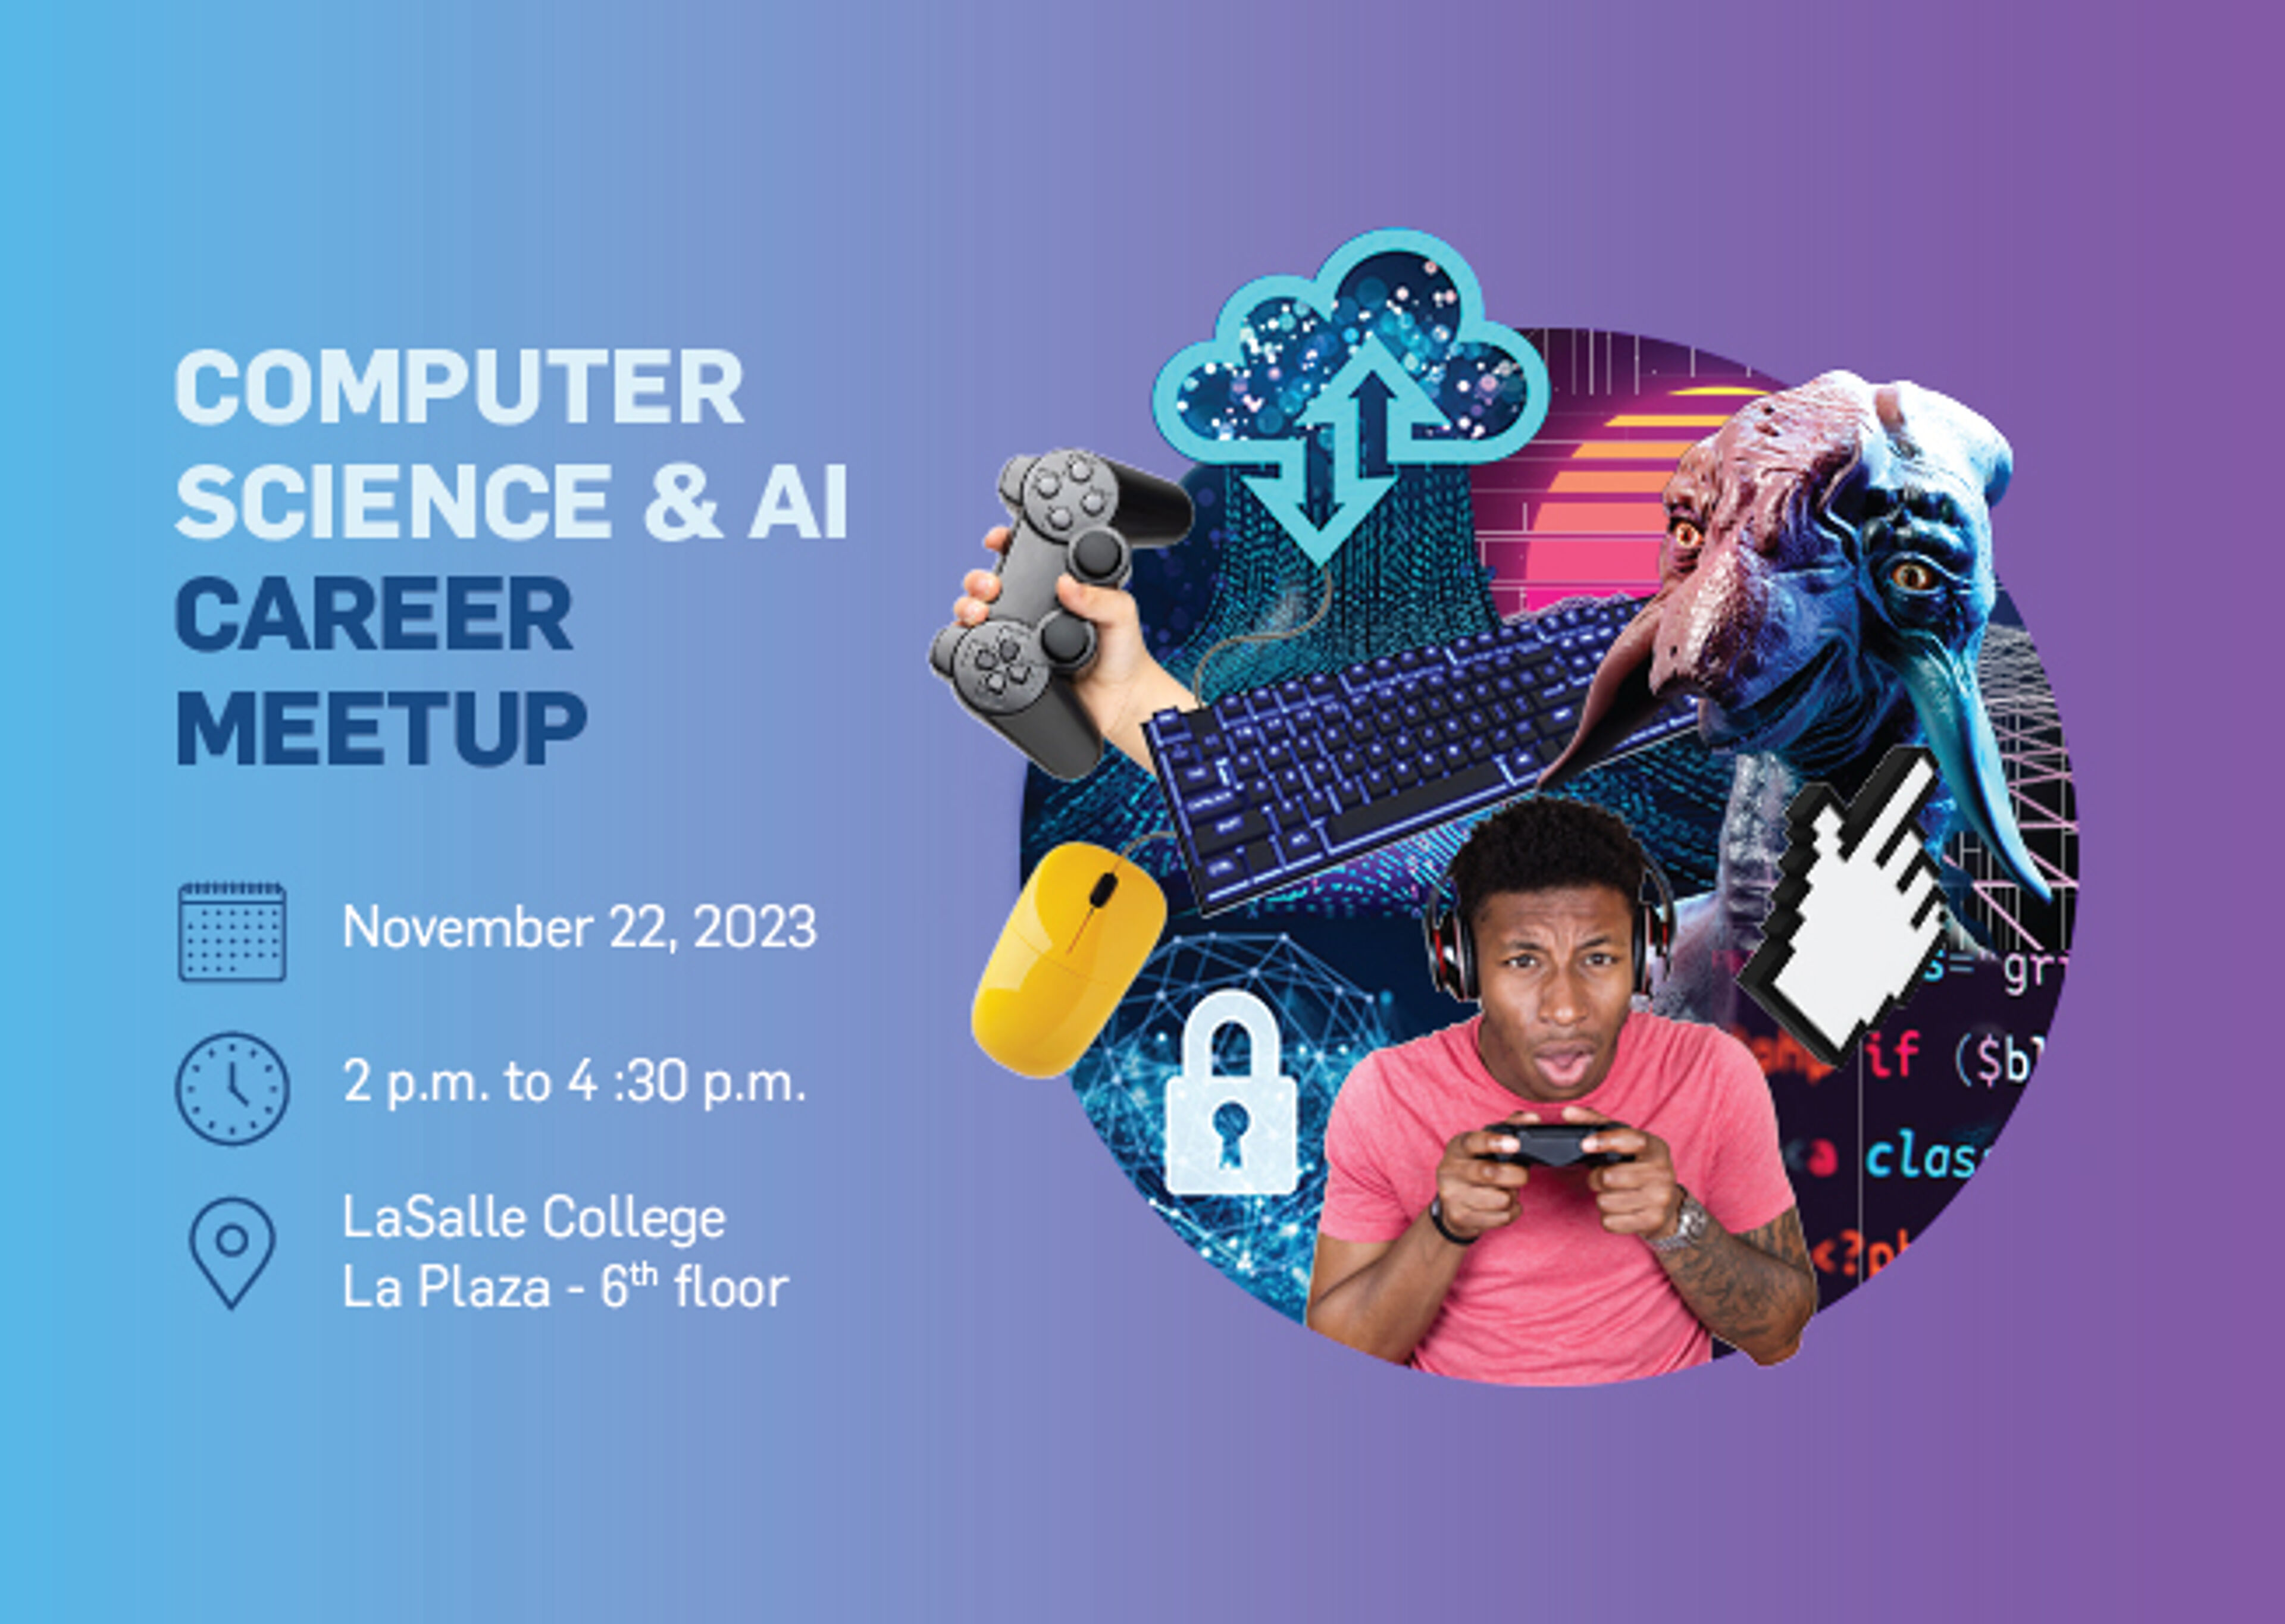 A colorful poster announcing a Computer Science and AI Career Meetup on November 22, 2023, with various digital and AI-related graphics.